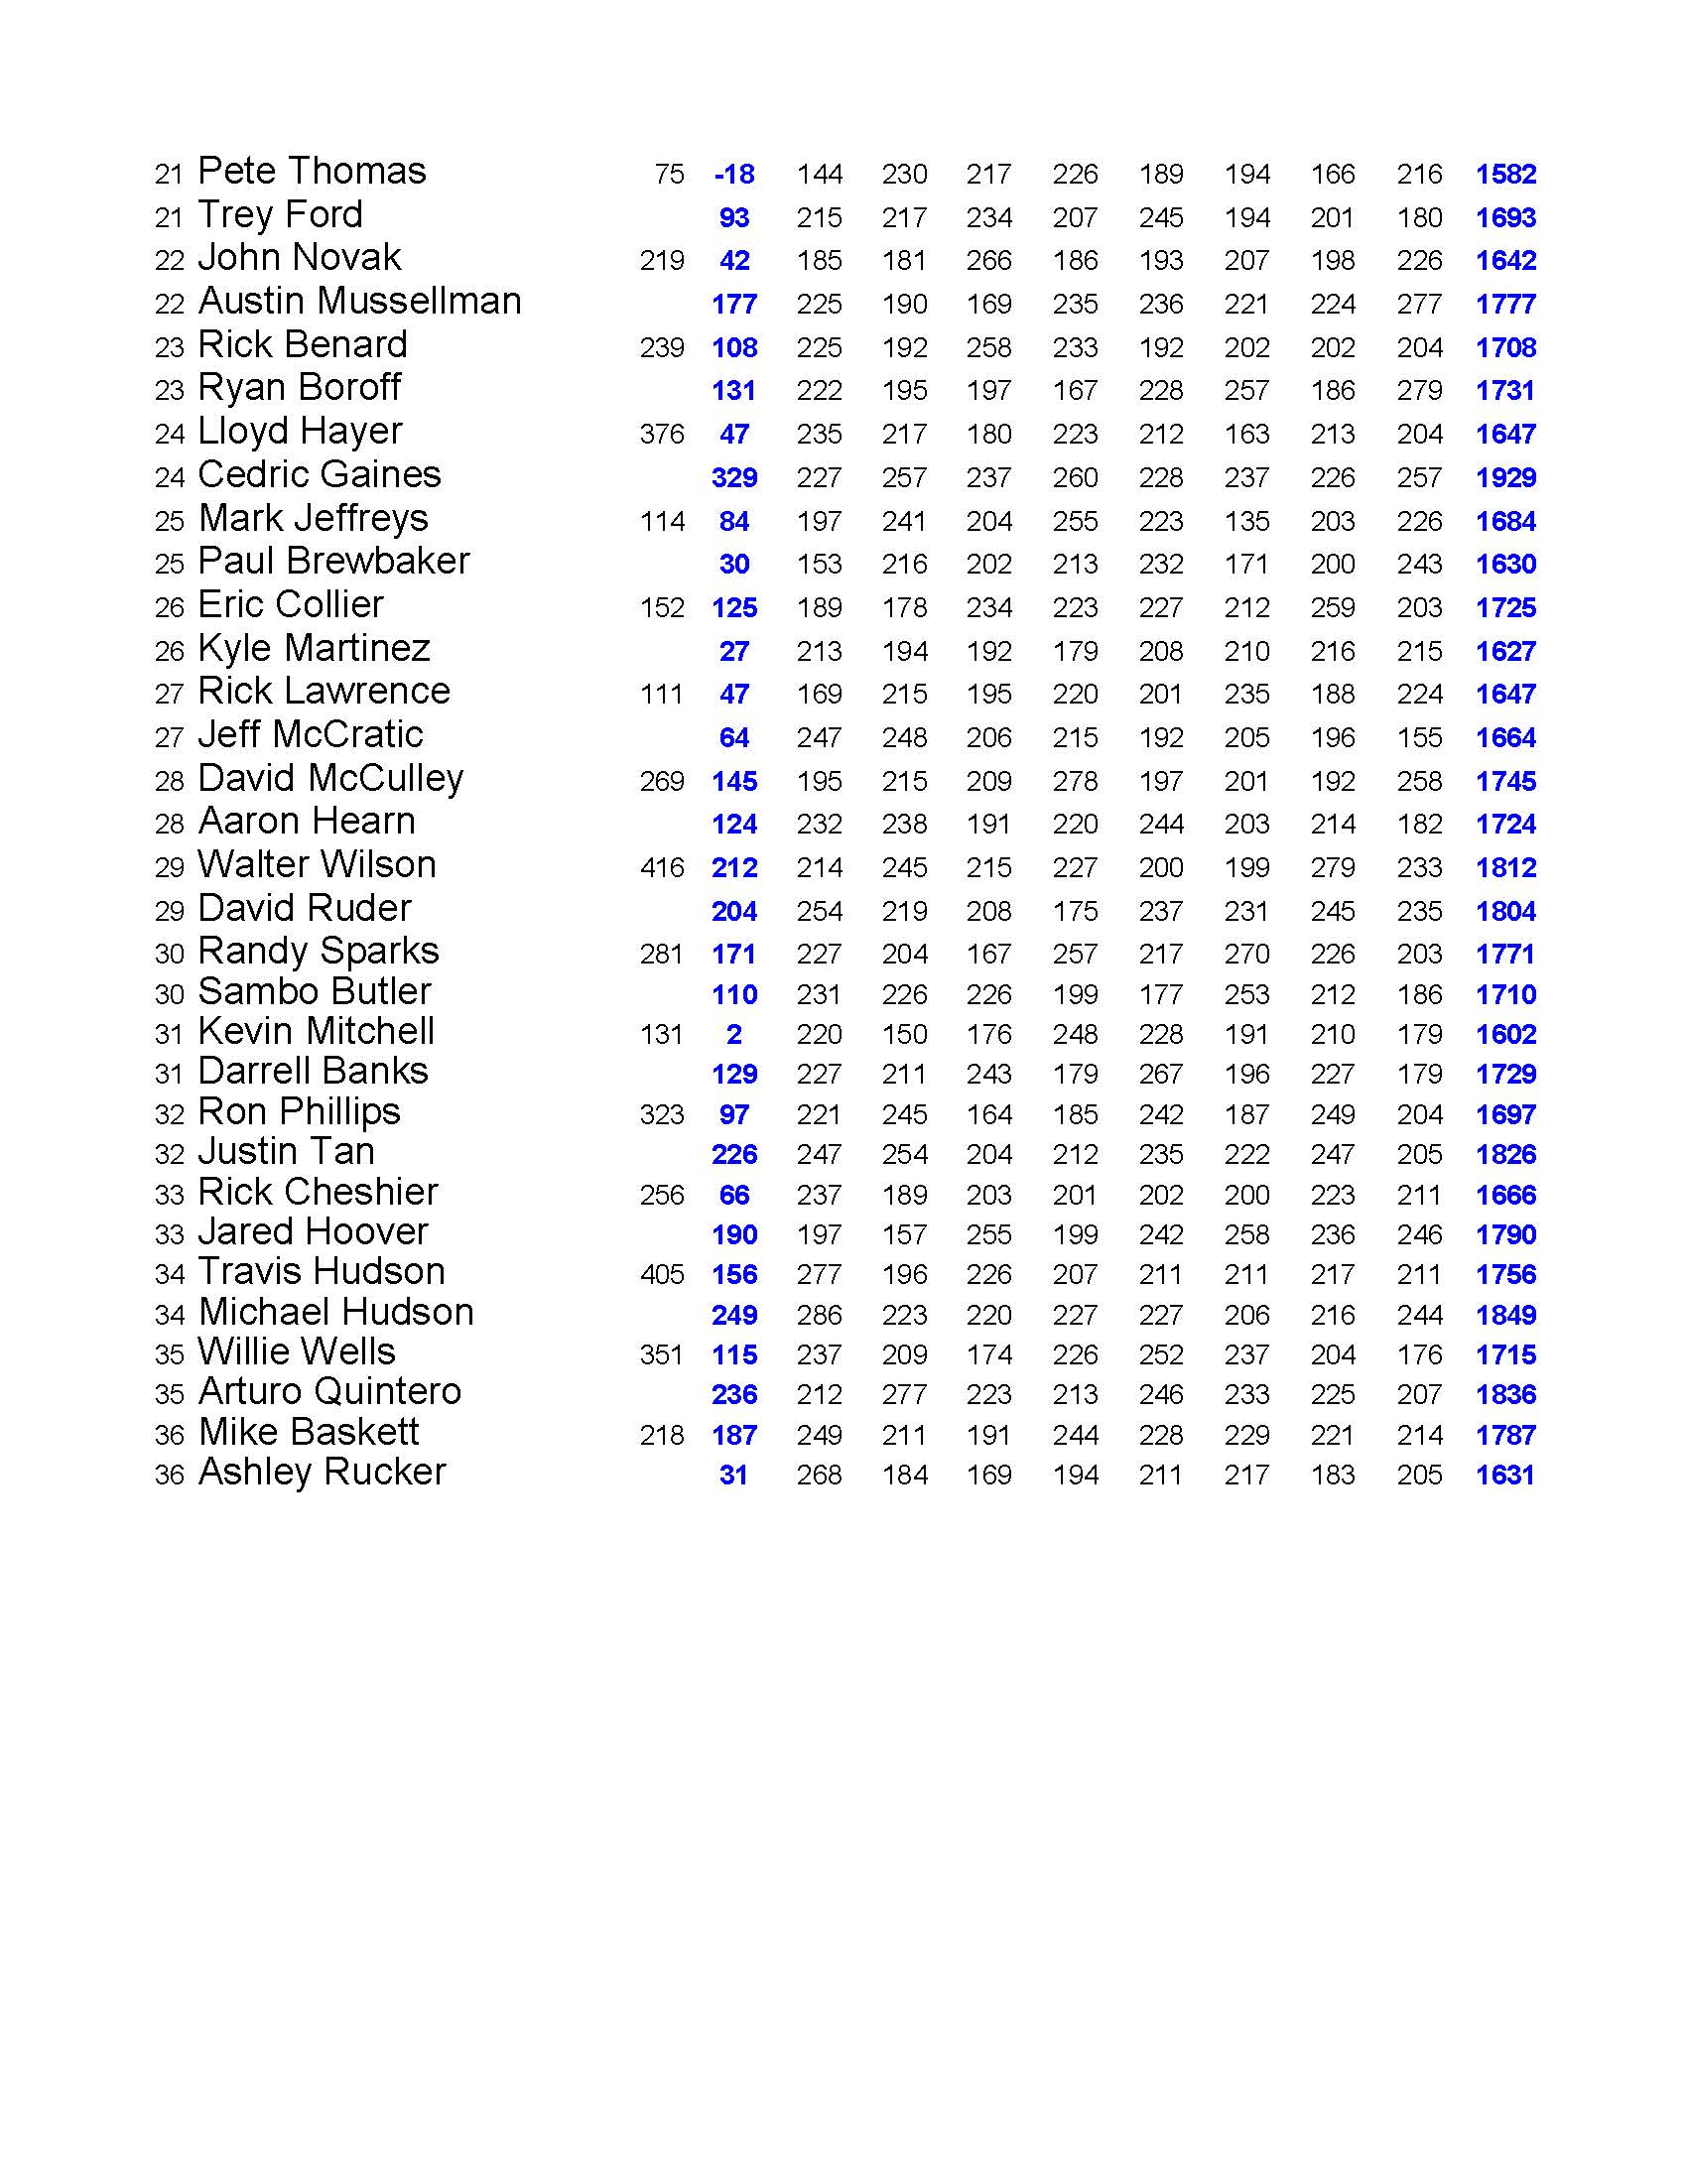 08152021results_Page_3